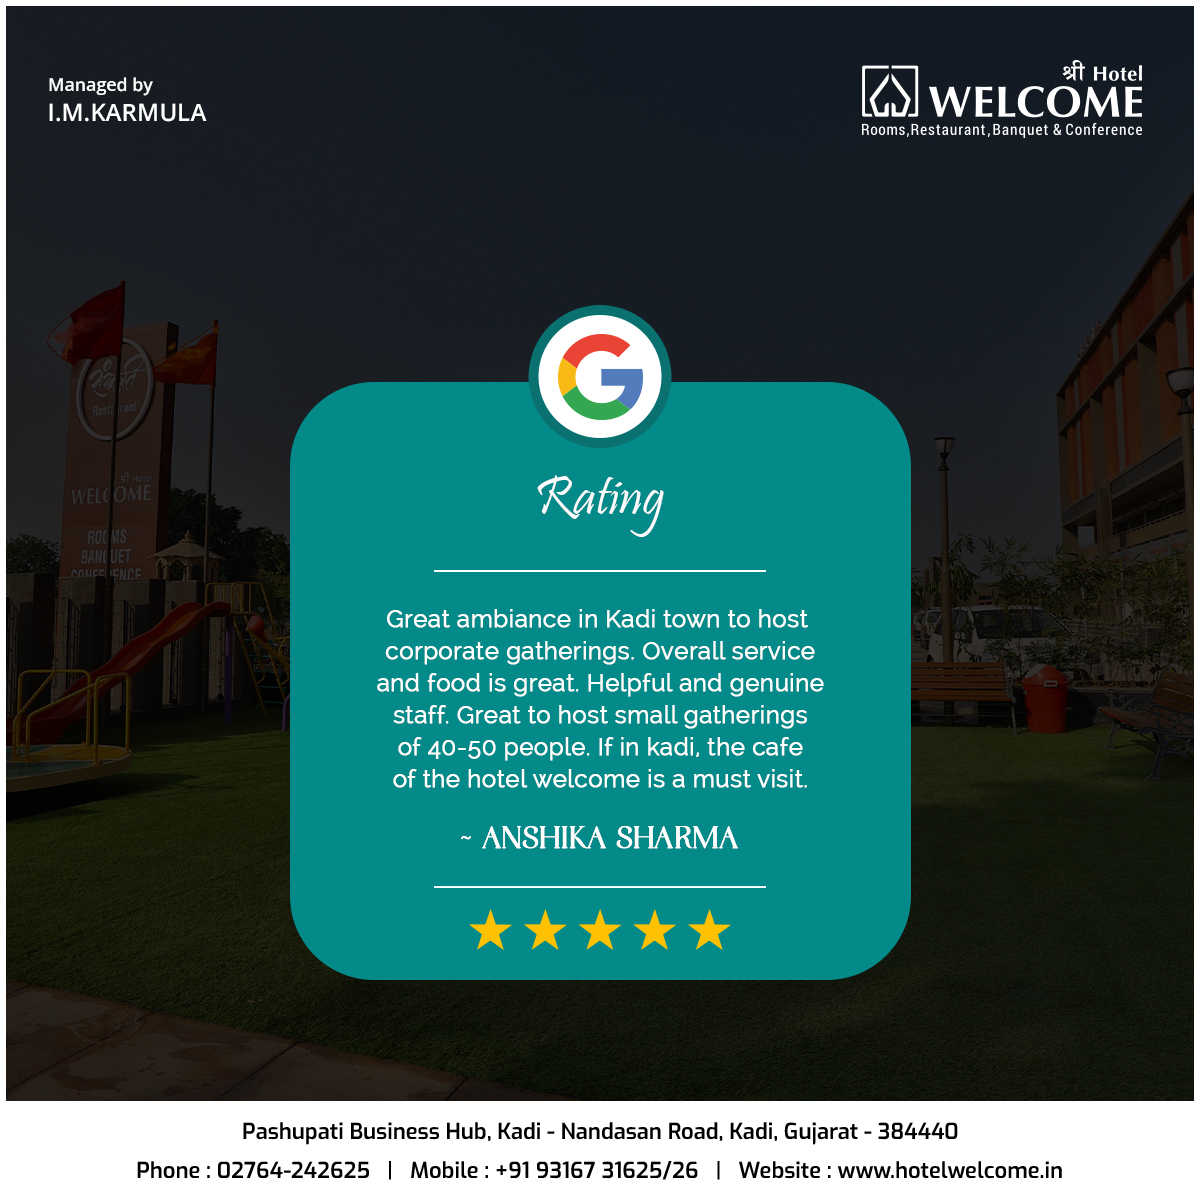 Google Business Review

#Hotel #Welcome #Rooms #Restaurant #Banquet #Kadi #lunch #terracegardenrestaurant #googlereview #googlebusiness #testimonial #reviews